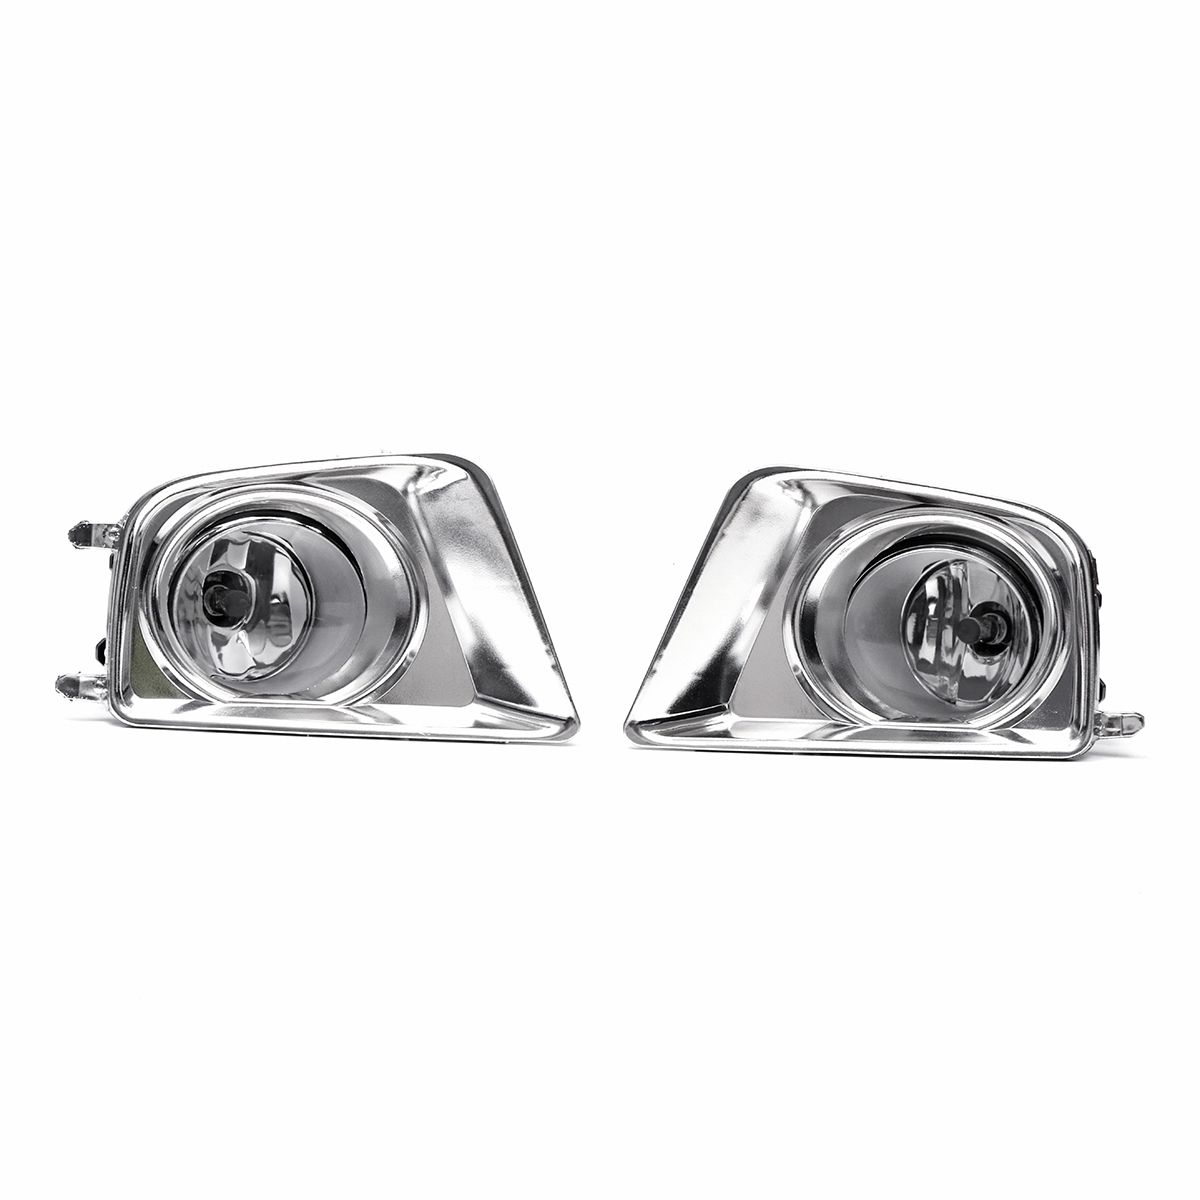 2Pcs-Car-Fog-Light-H11-Bulbs-Chrome-Silver-With-Wire-Harness-Covers-Kit-For-Toyota-Tacoma-2012-2015-1680516